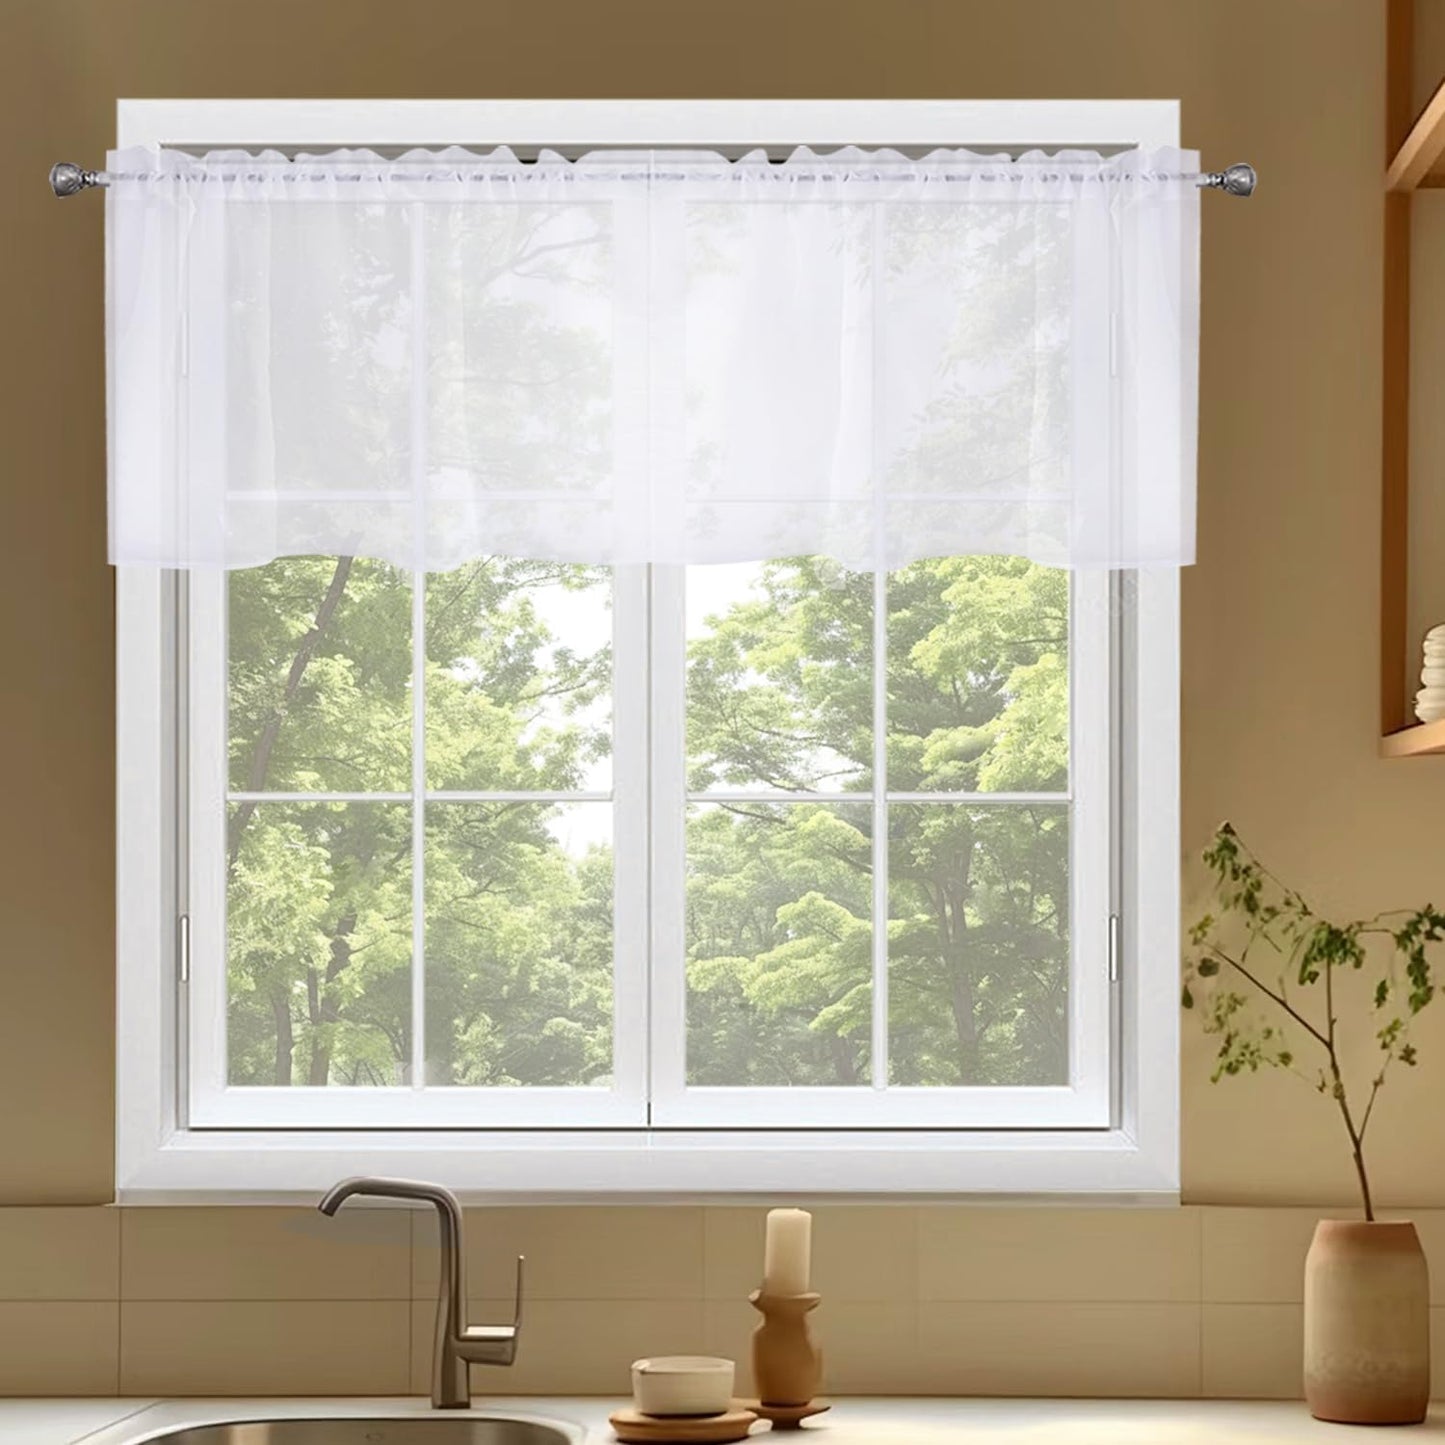 Spacedresser Basic Rod Pocket Sheer Voile Window Curtain Panels White 1 Pair 2 Panels 52 Width 84 Inch Long for Kitchen Bedroom Children Living Room Yard(White,52 W X 84 L)  Lucky Home White 52 W X 18 L 